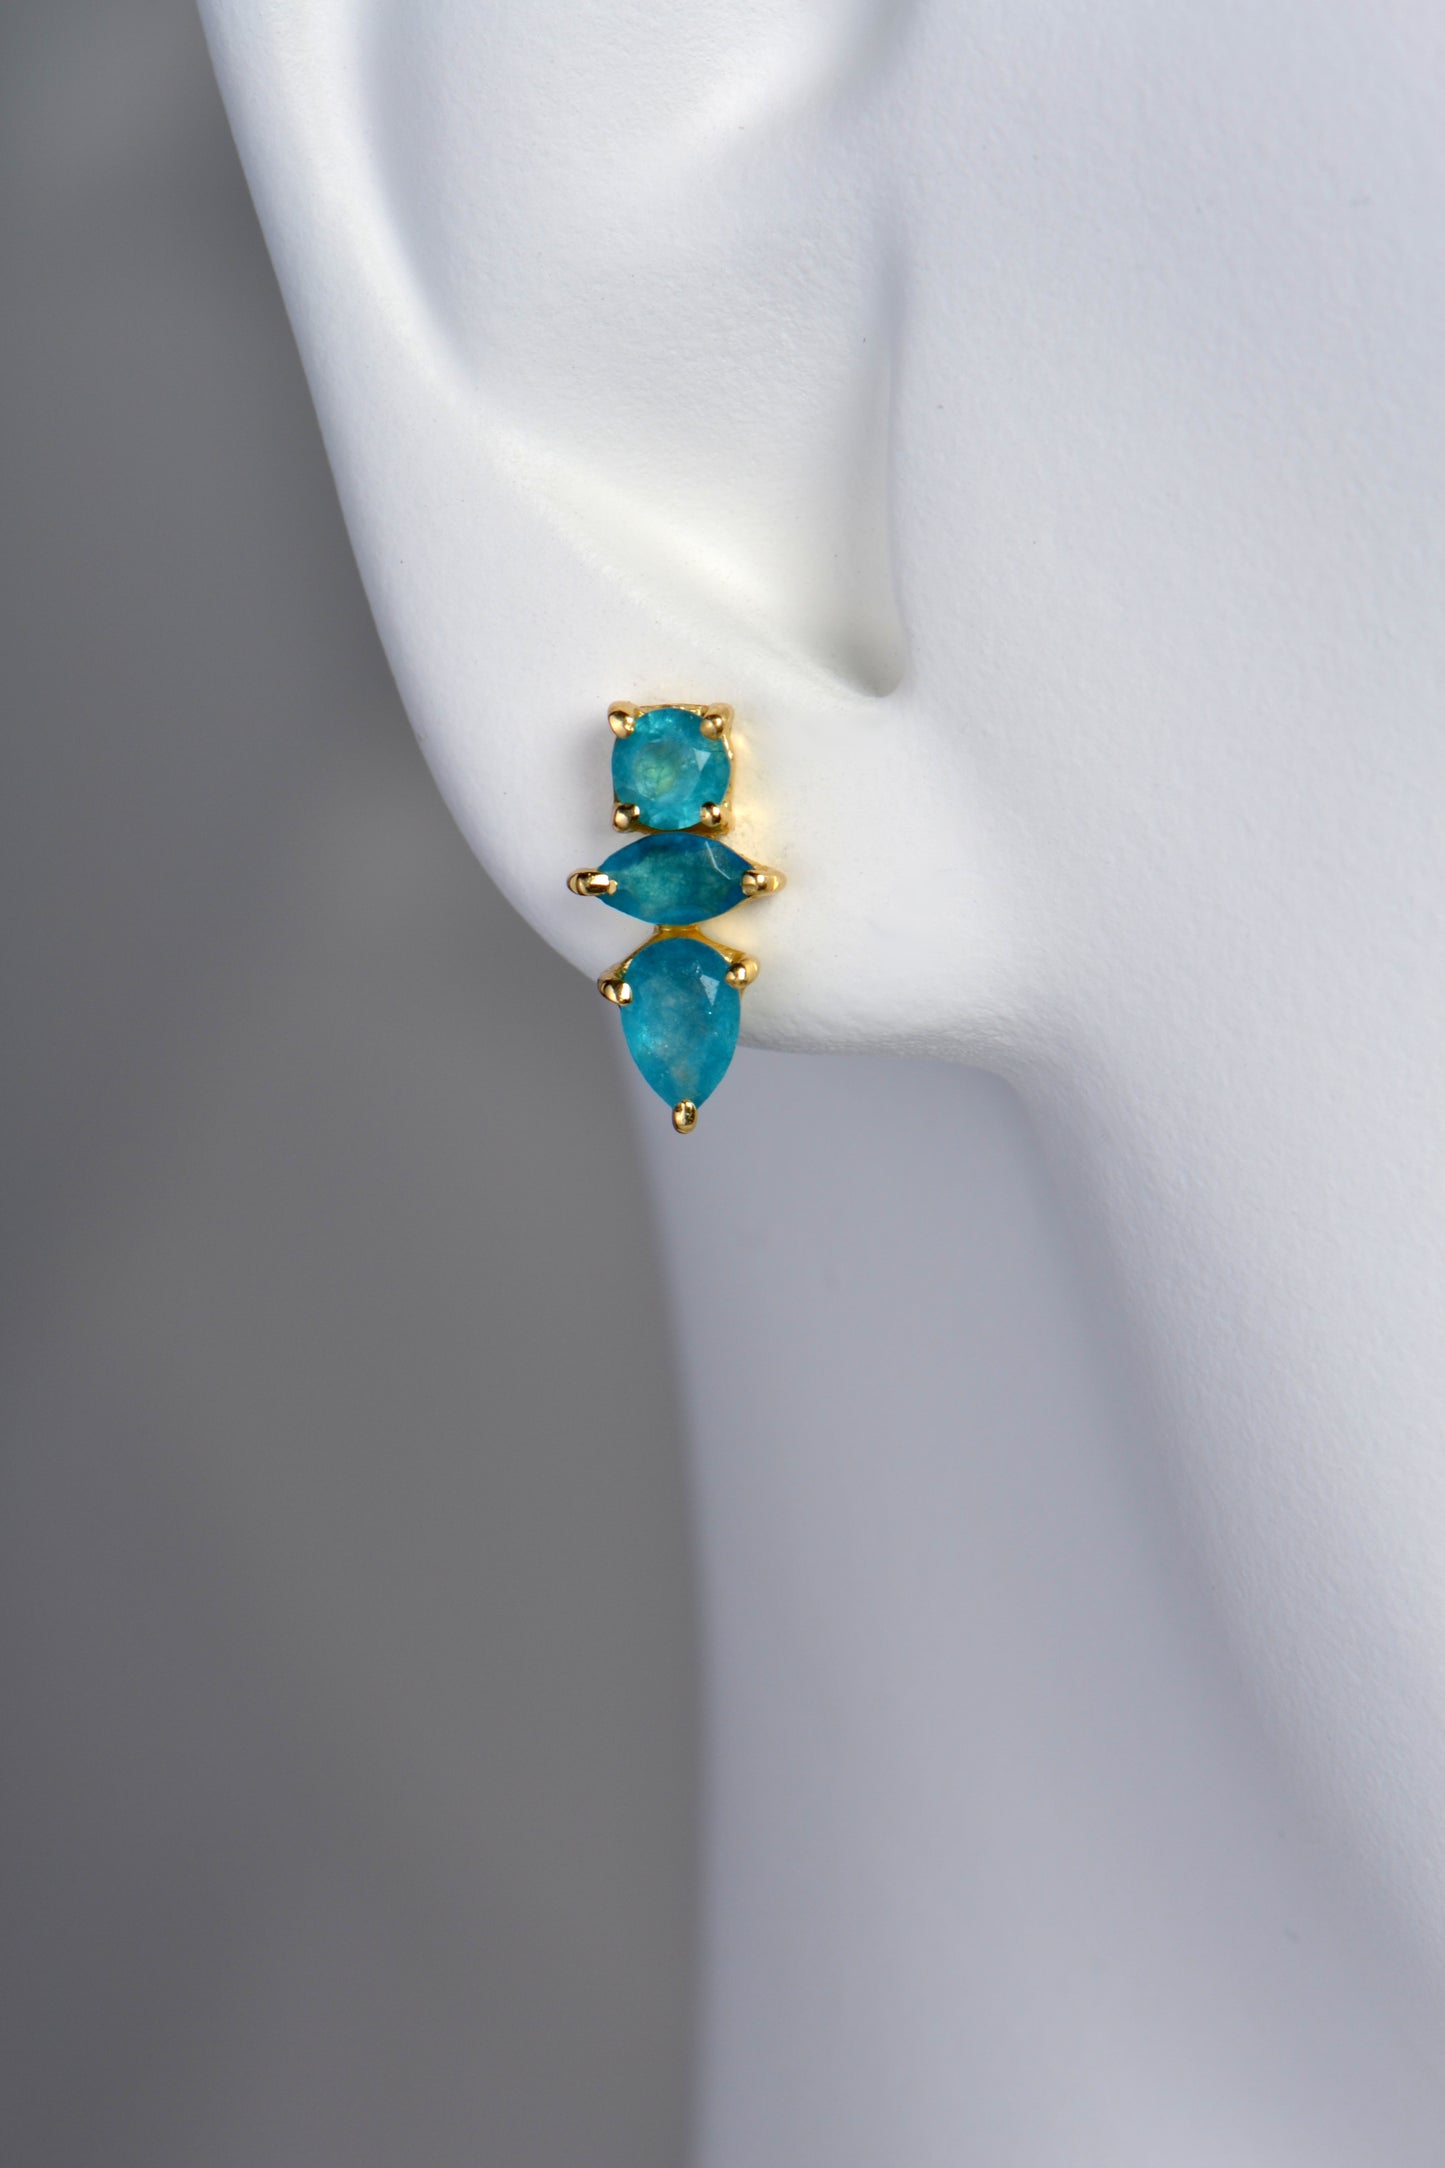 stacked gemstones, teal blue apatite earrings with gold plated silver settings